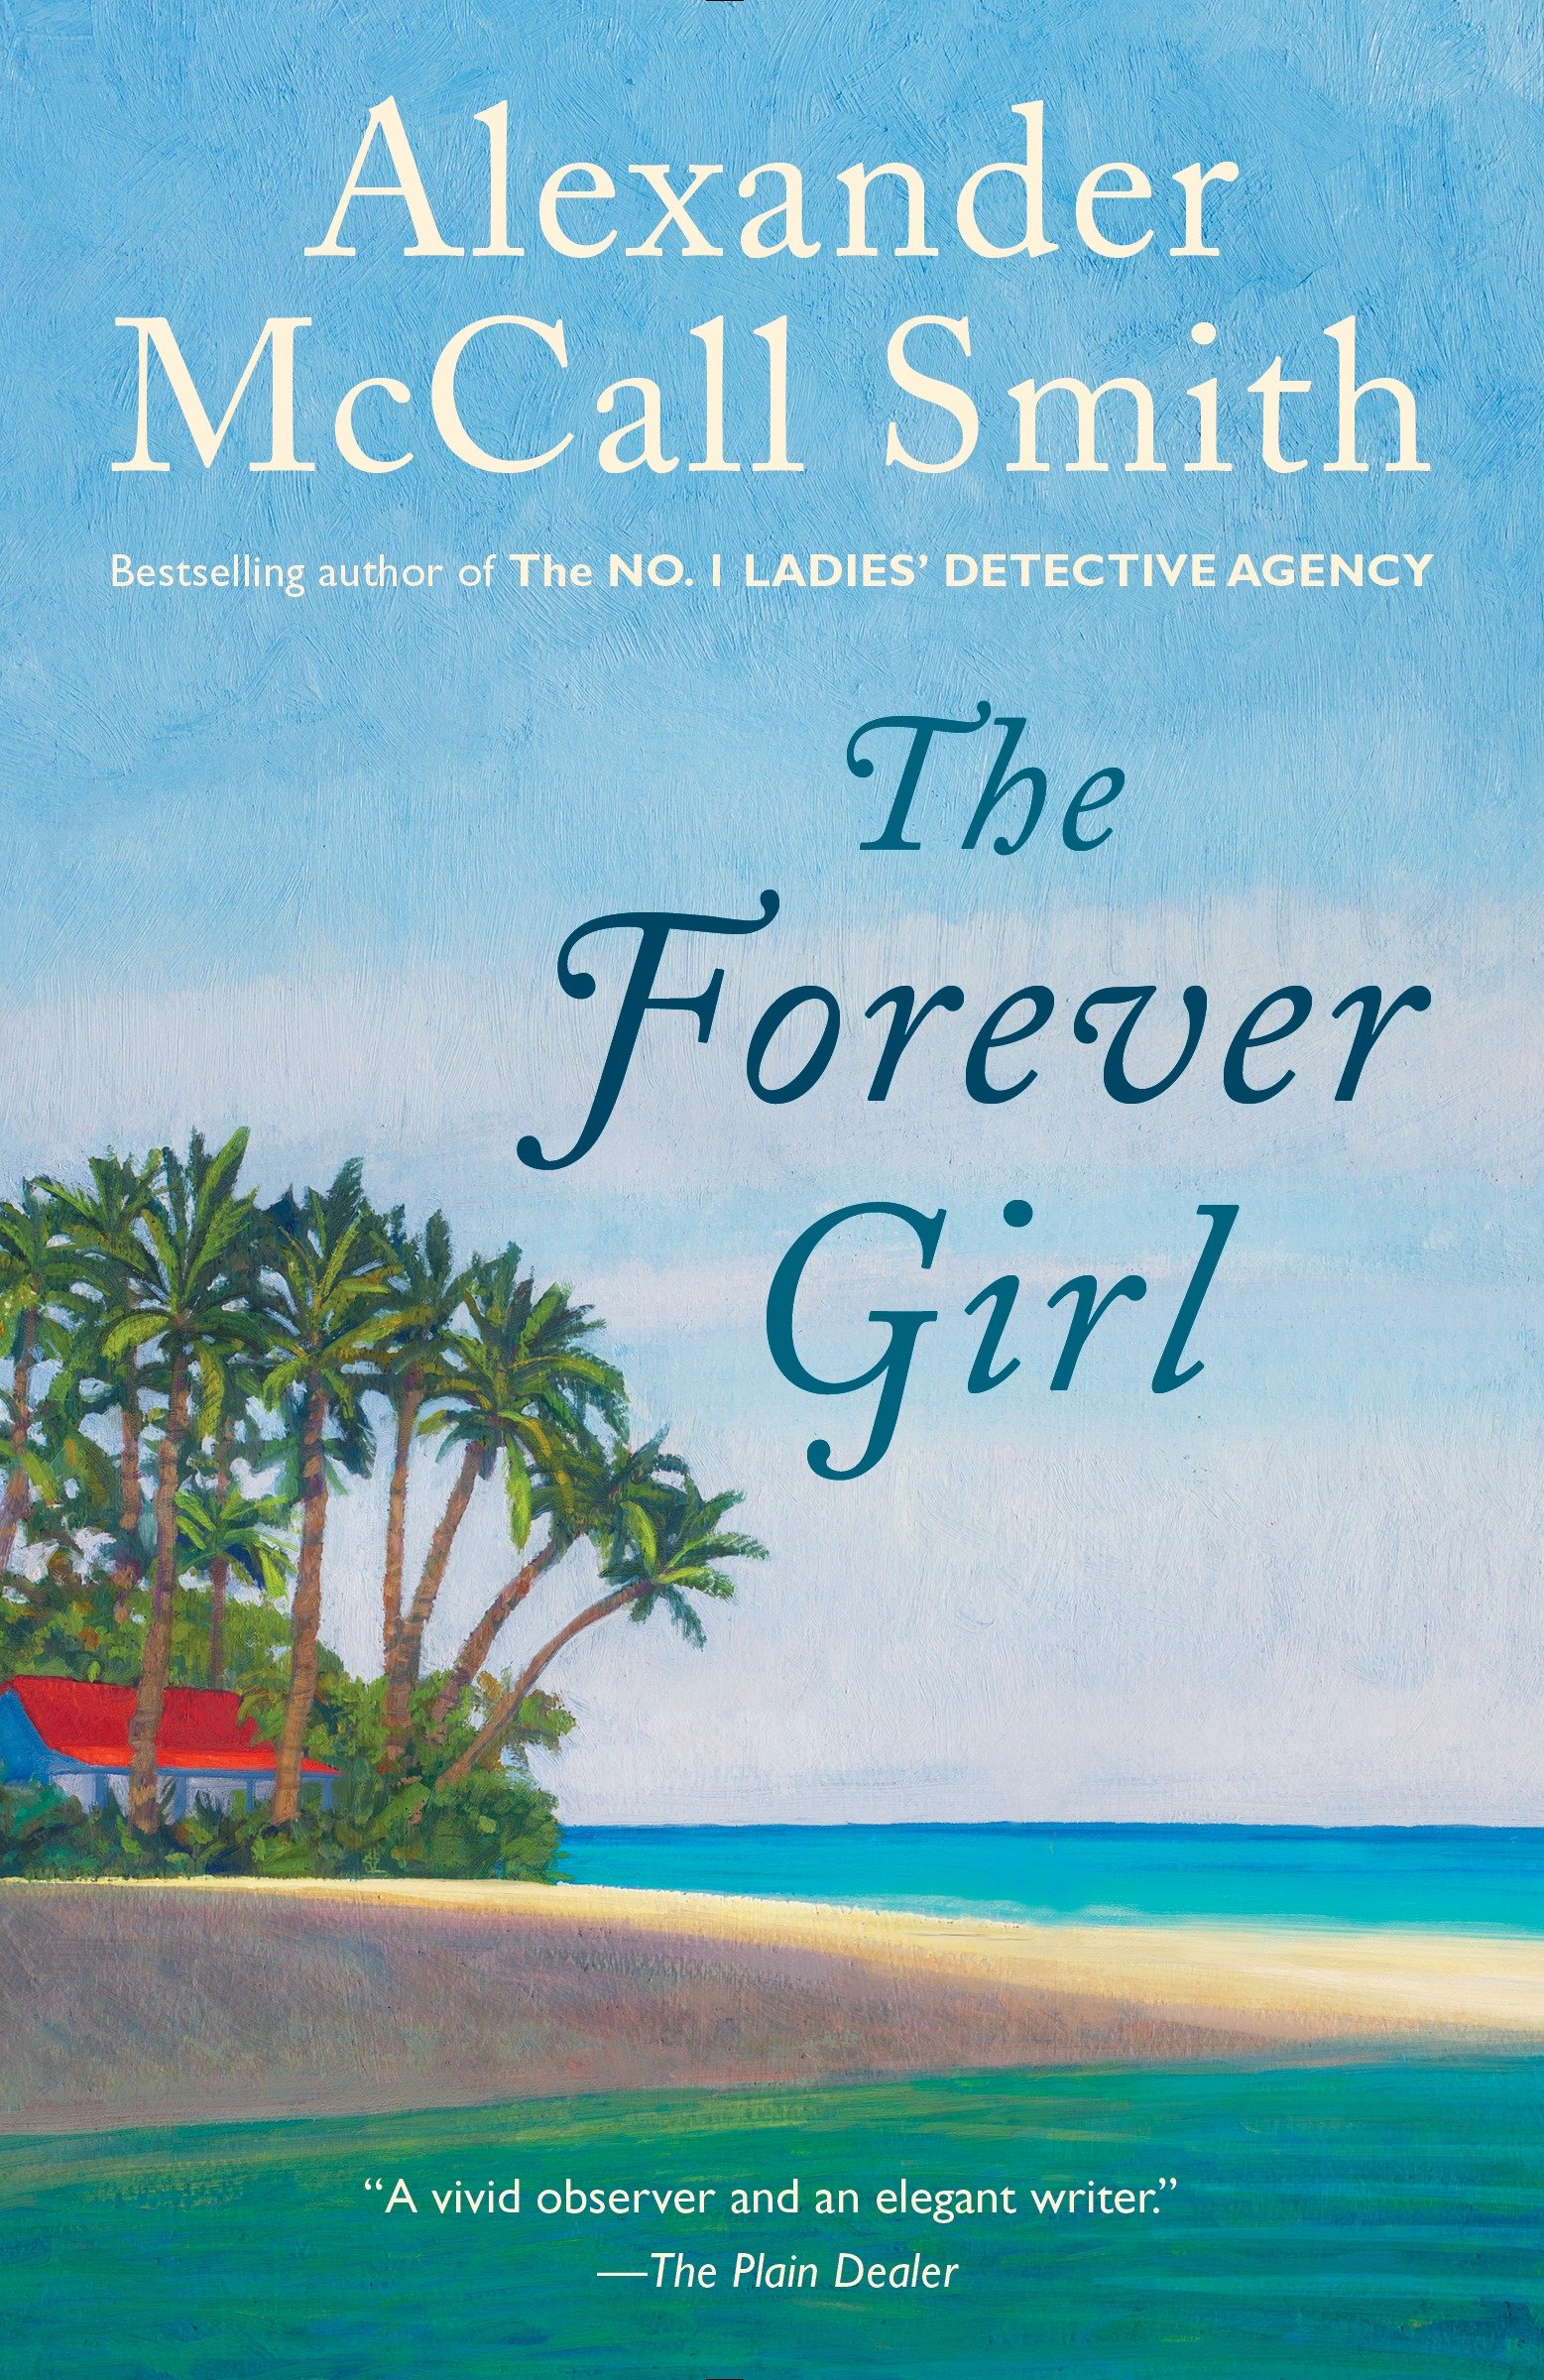 The forever girl cover image